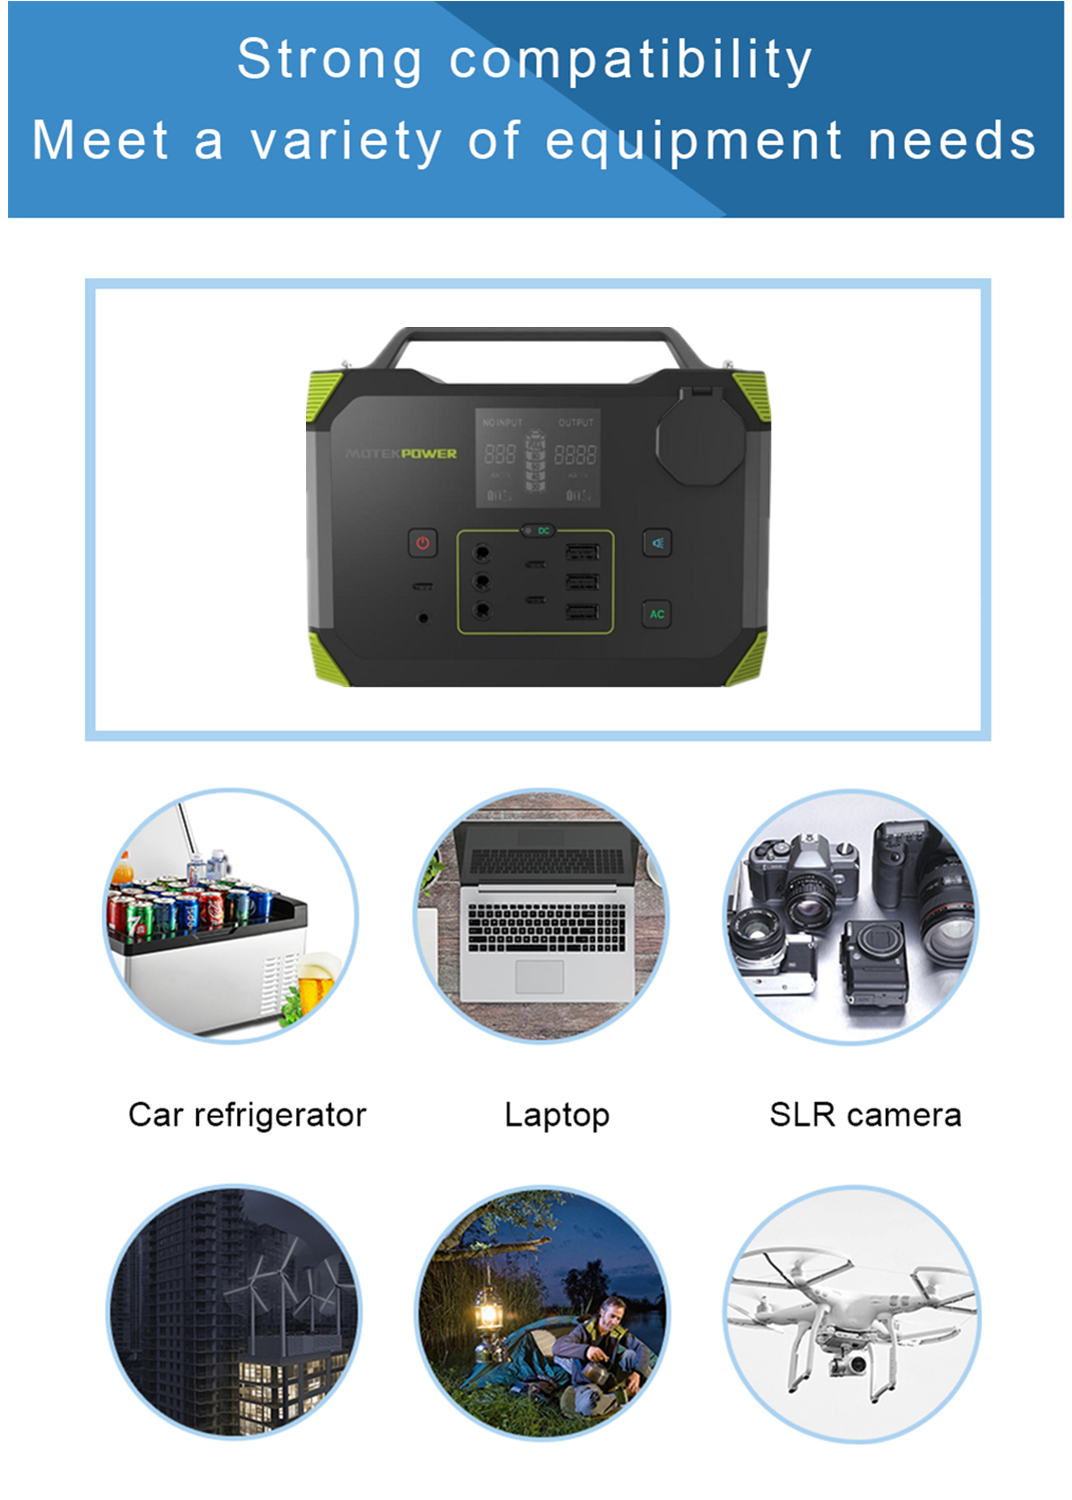 outstandingly compatible with various outdoor power equipments like car refrigerator, laptop, camera, drones, wild camping and suburban power outage